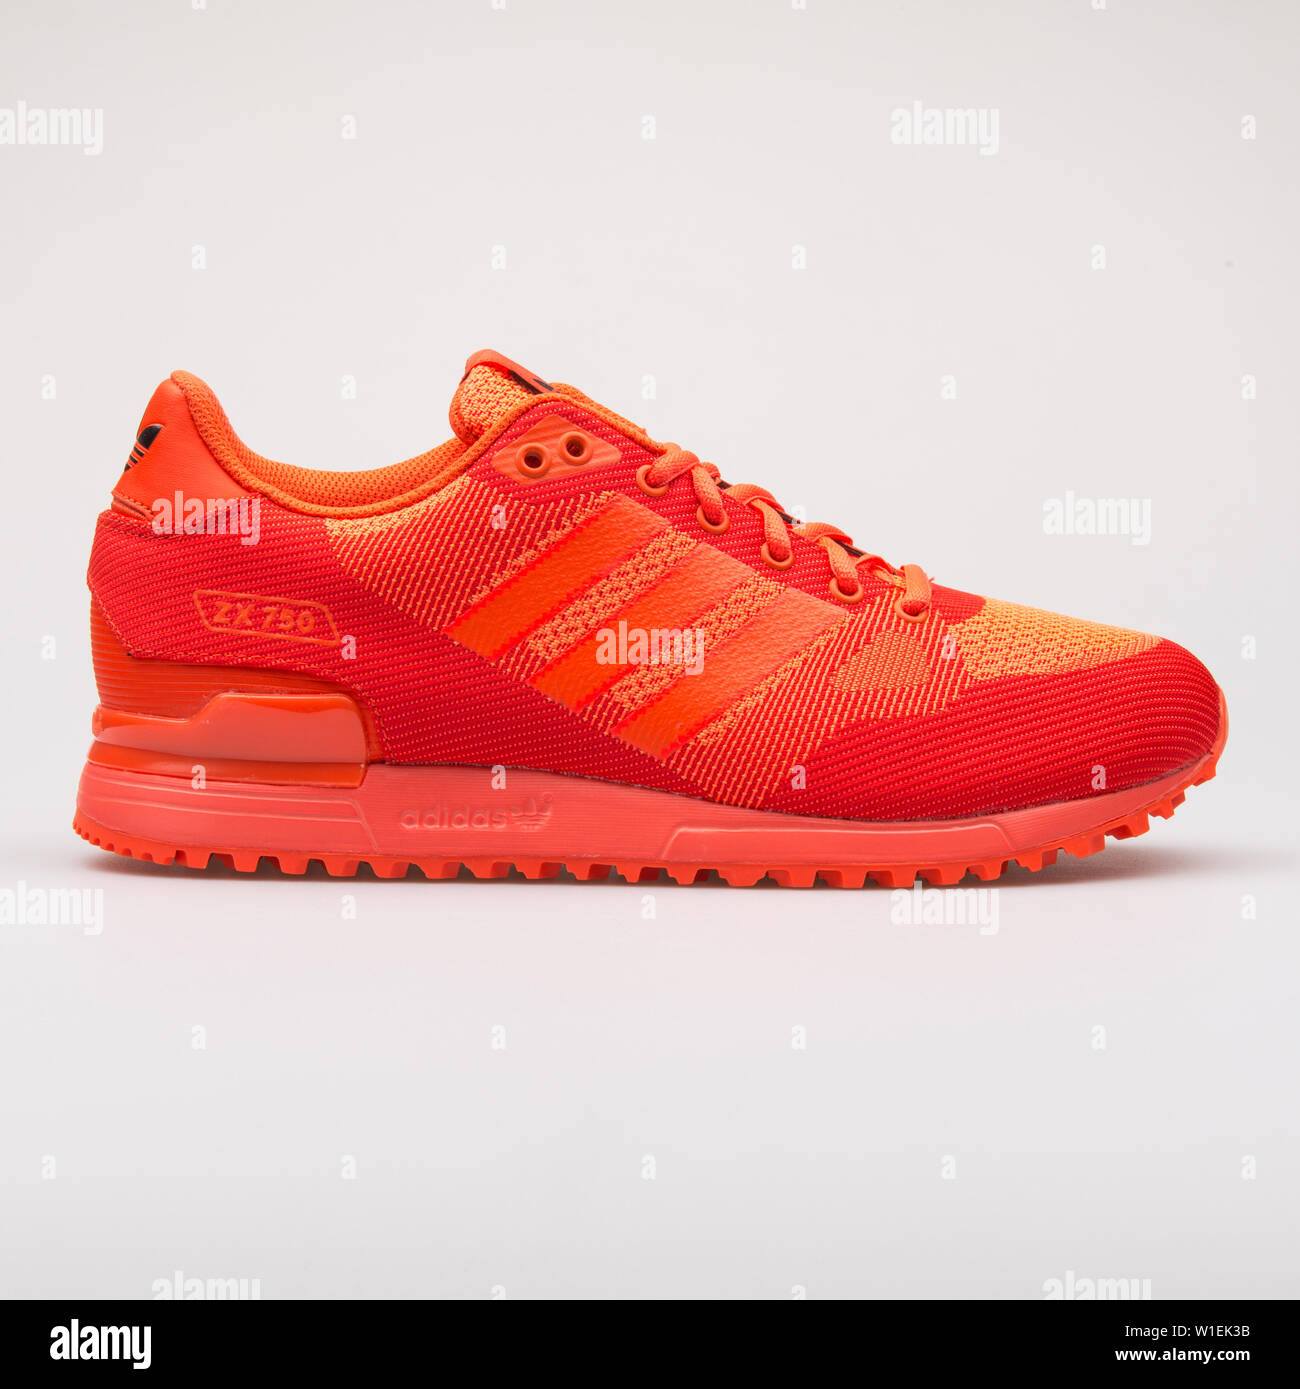 Adidas ZX 750 WV solar red sneaker on 